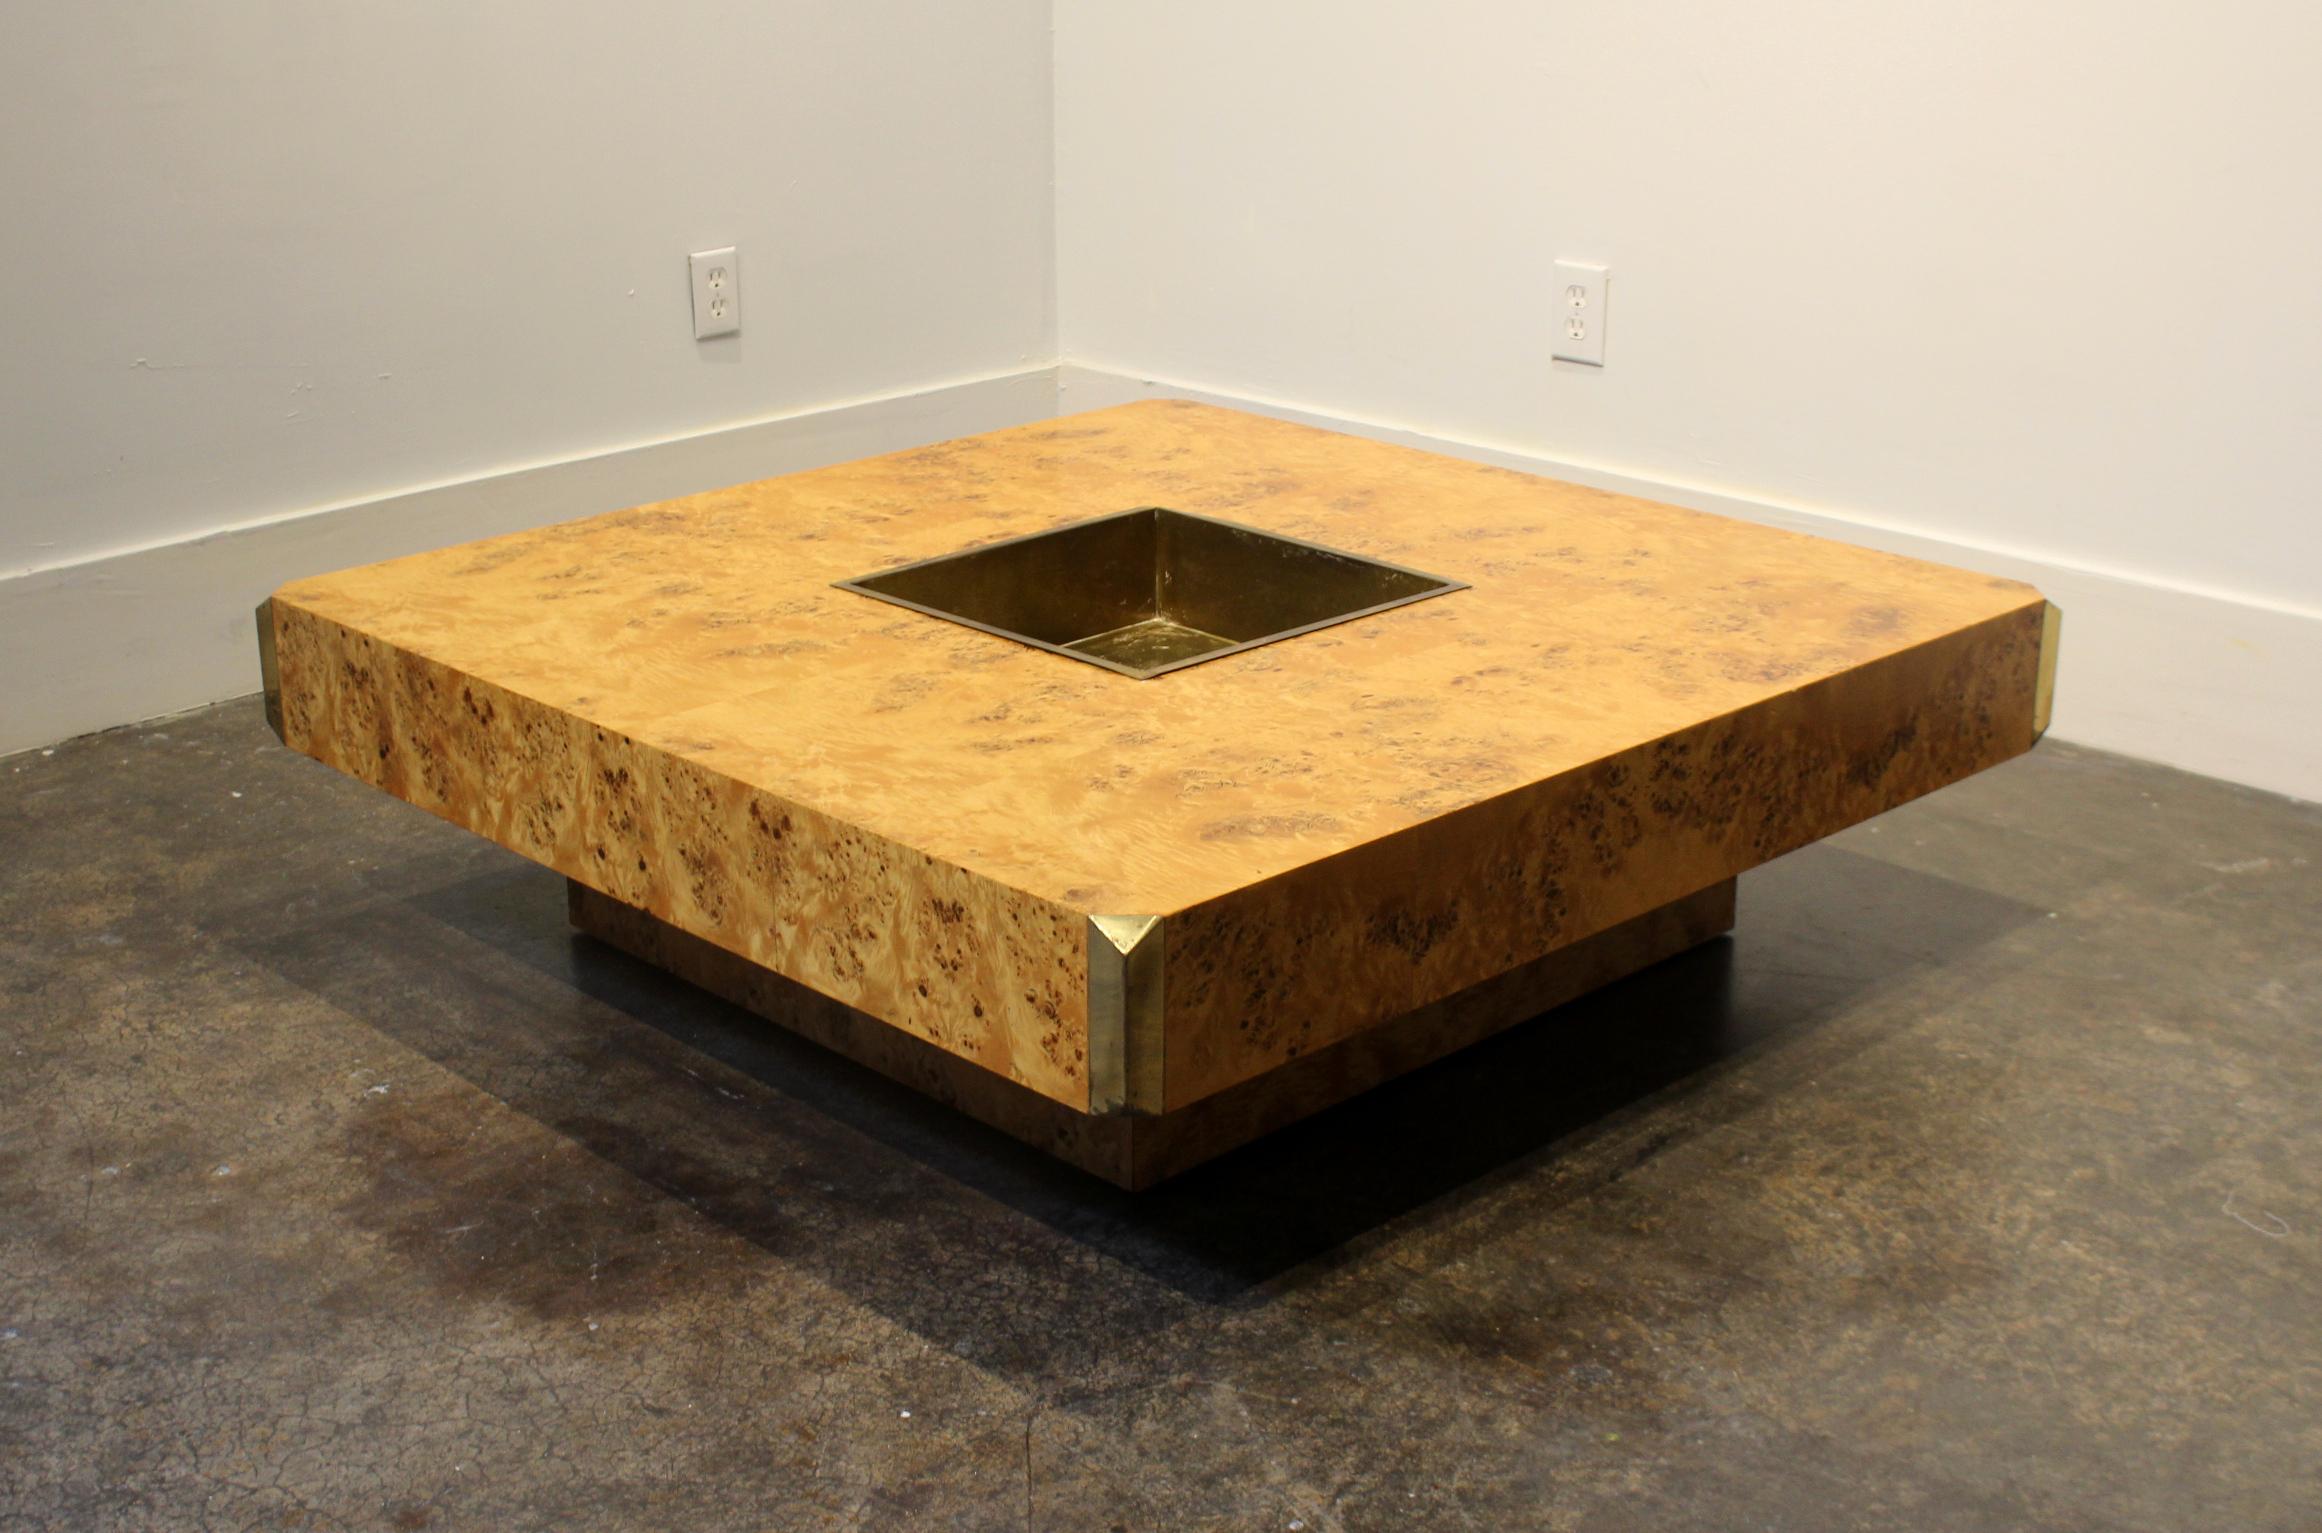 Gorgeous 1970s Italian coffee table by Willy Rizzo, made with light maple burl veneer, with striking brass accents on corners, includes brass basin that can be used as ice bucket or planter. Raised on burl wood plinth.